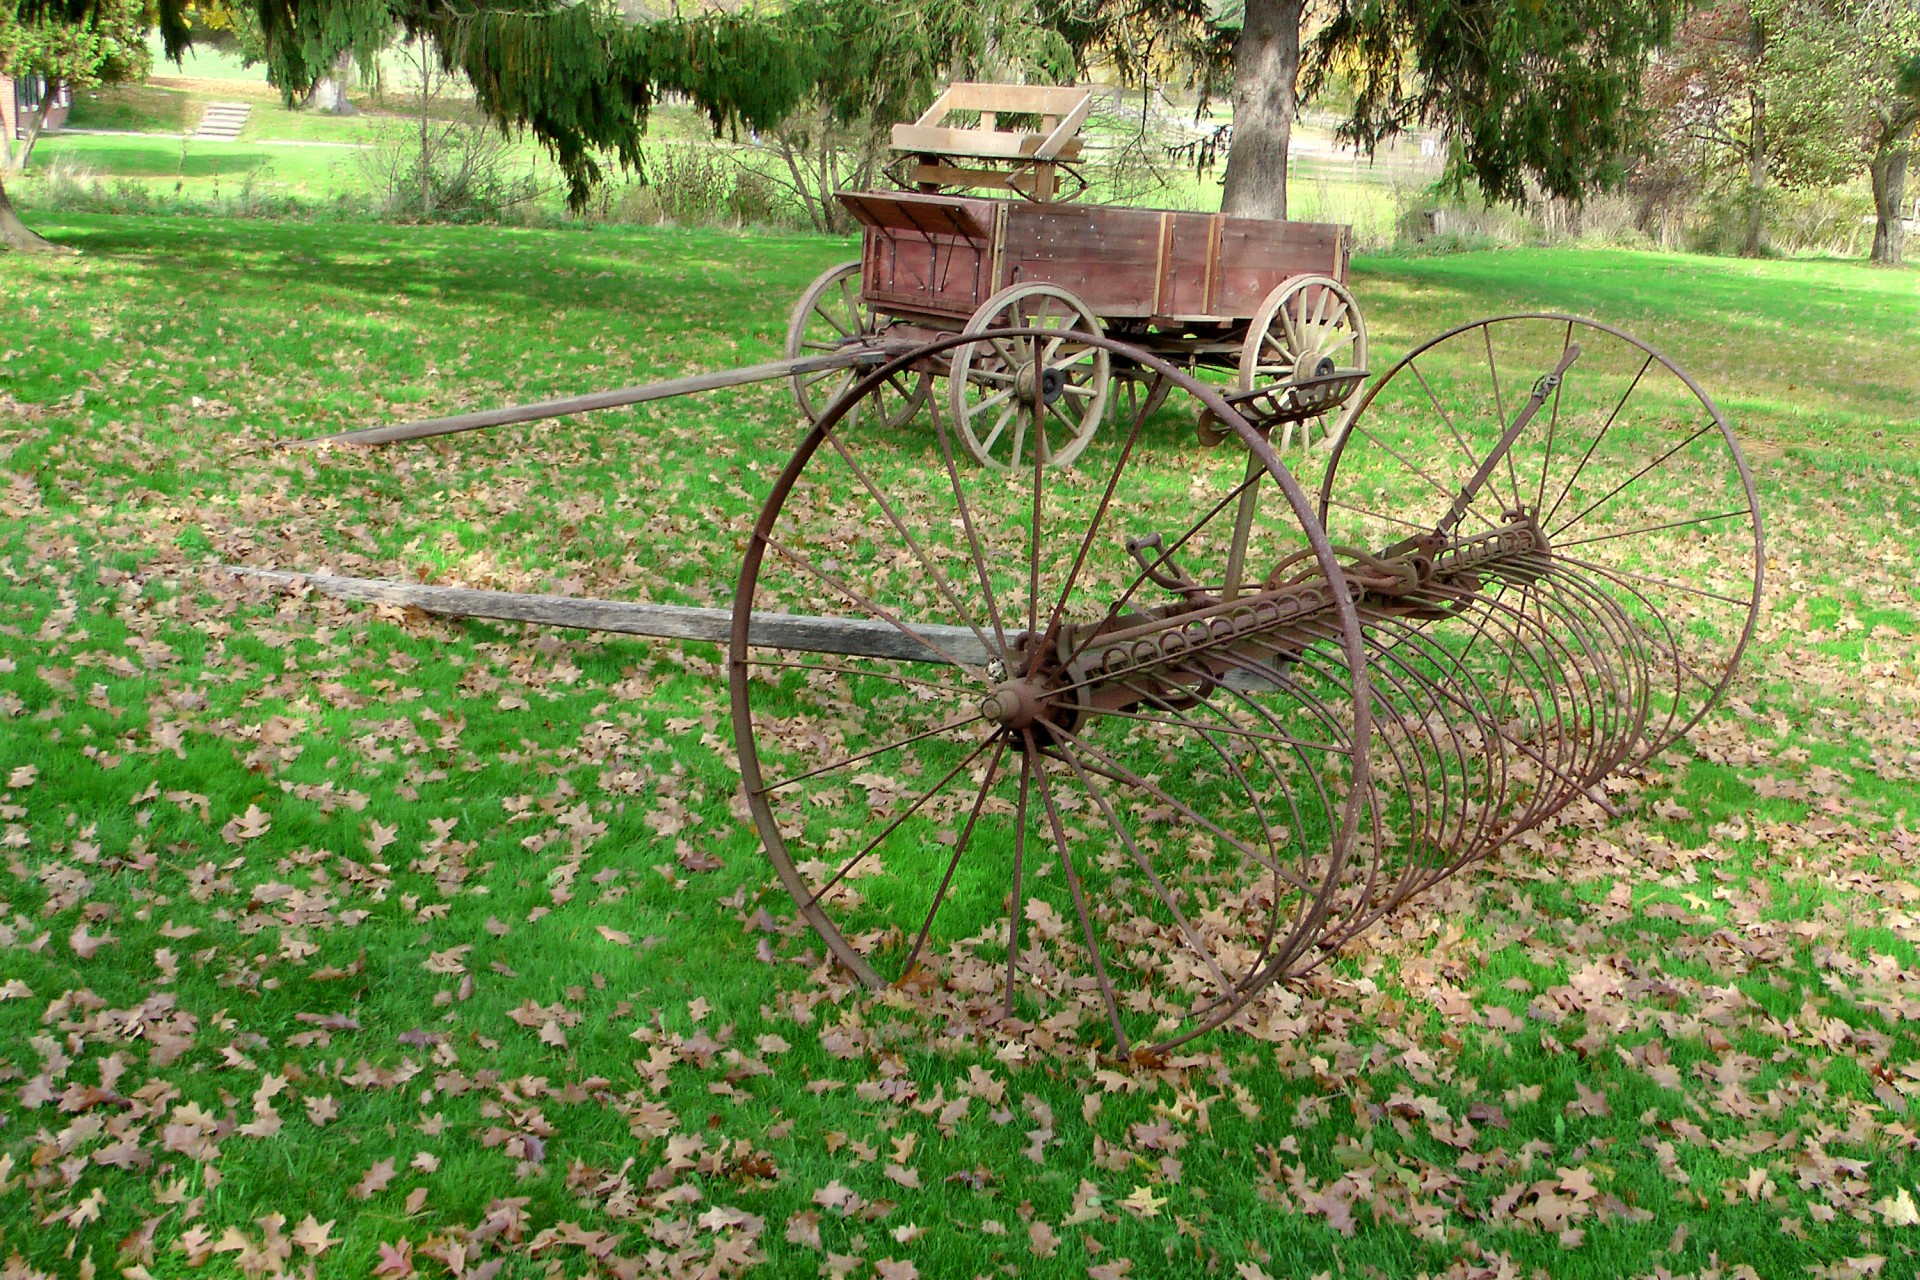 Old piece of metal farm equipment used on a farm